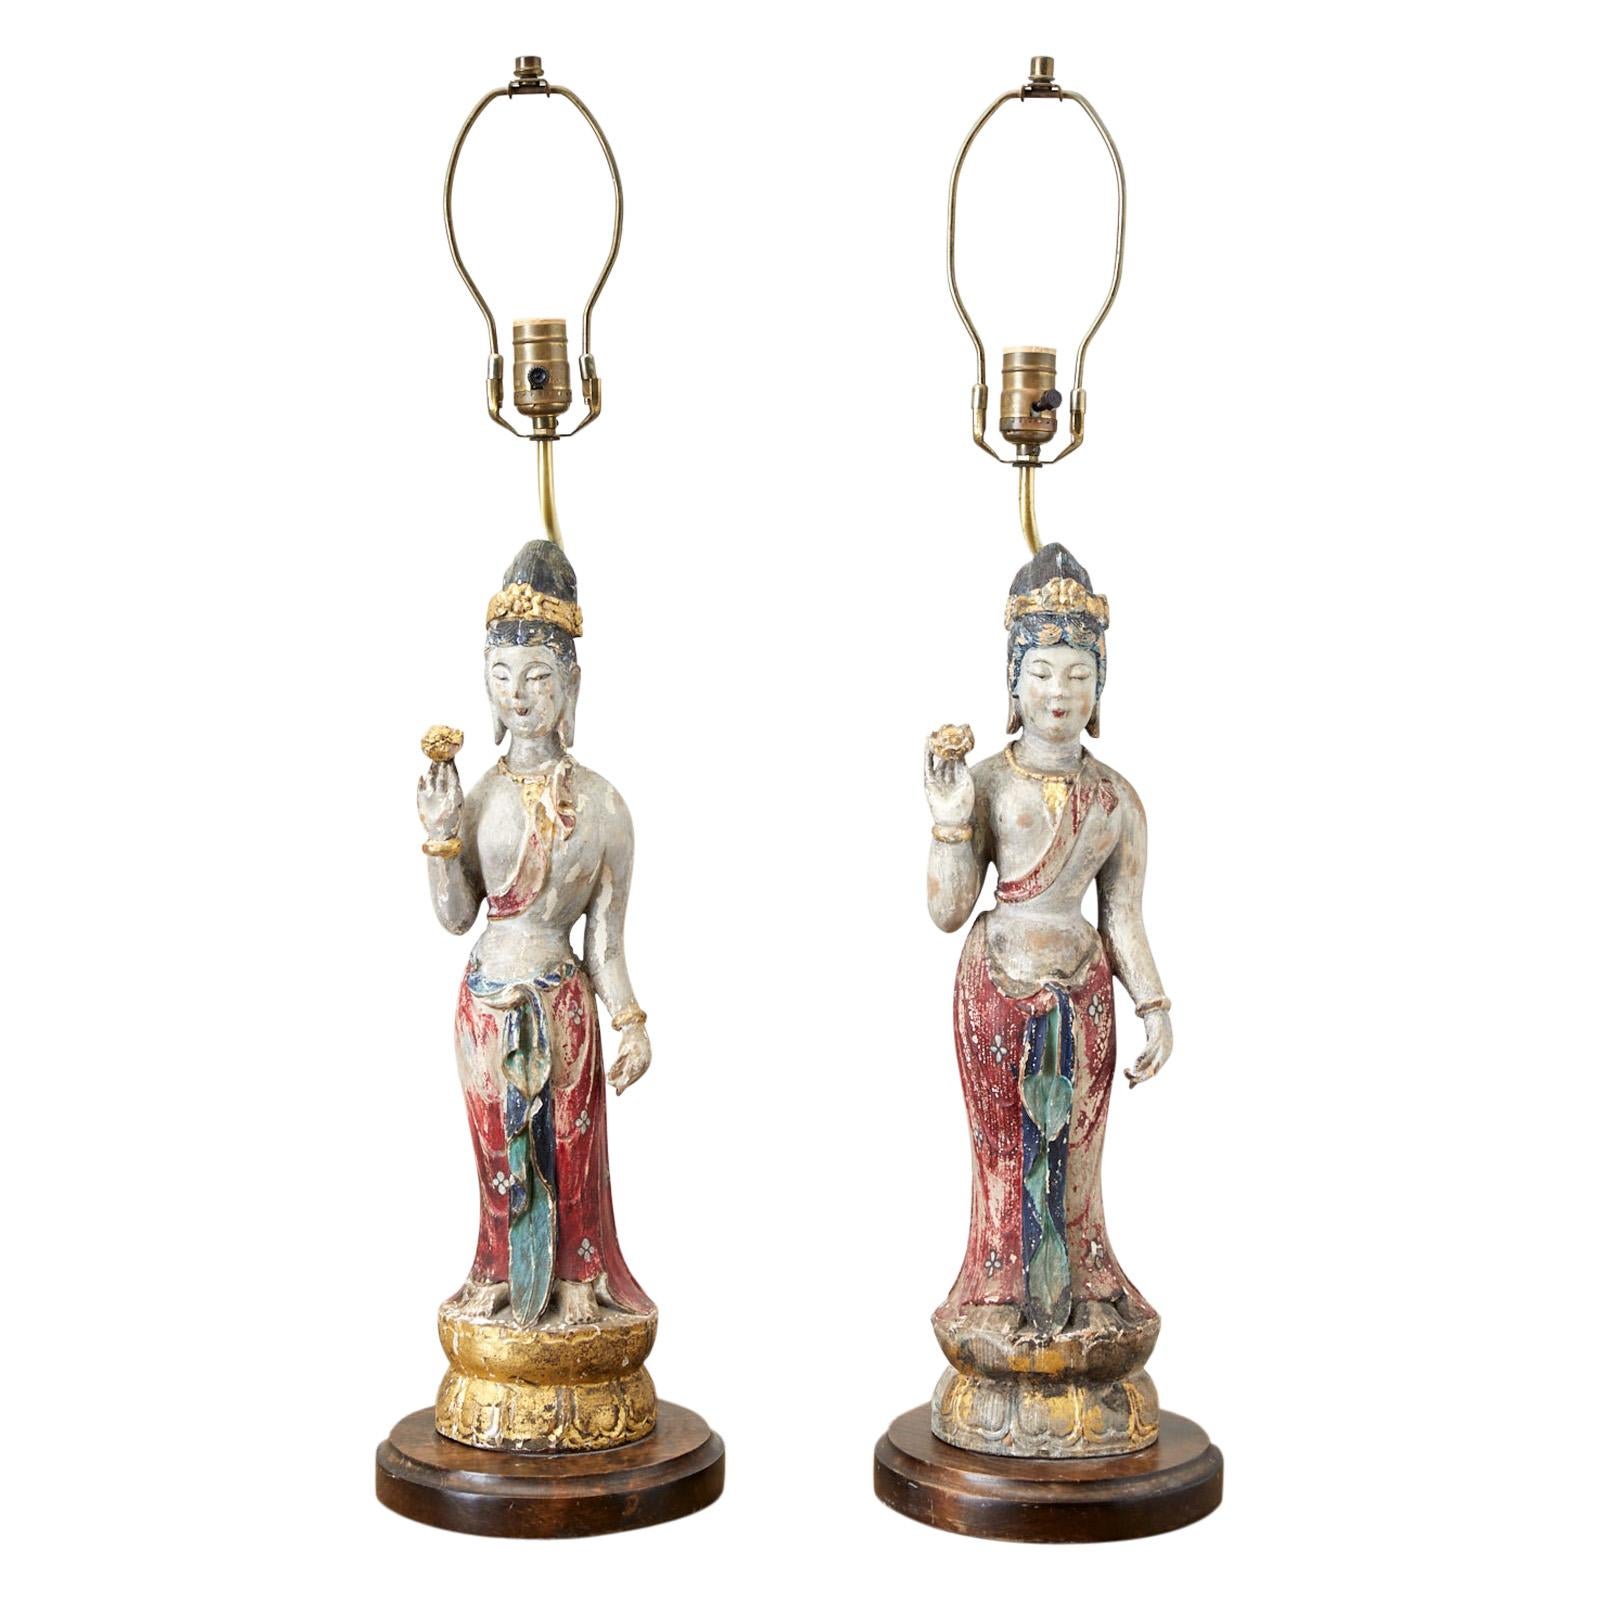 Pair of Chinese Polychrome Quan Yin Deity Table Lamps